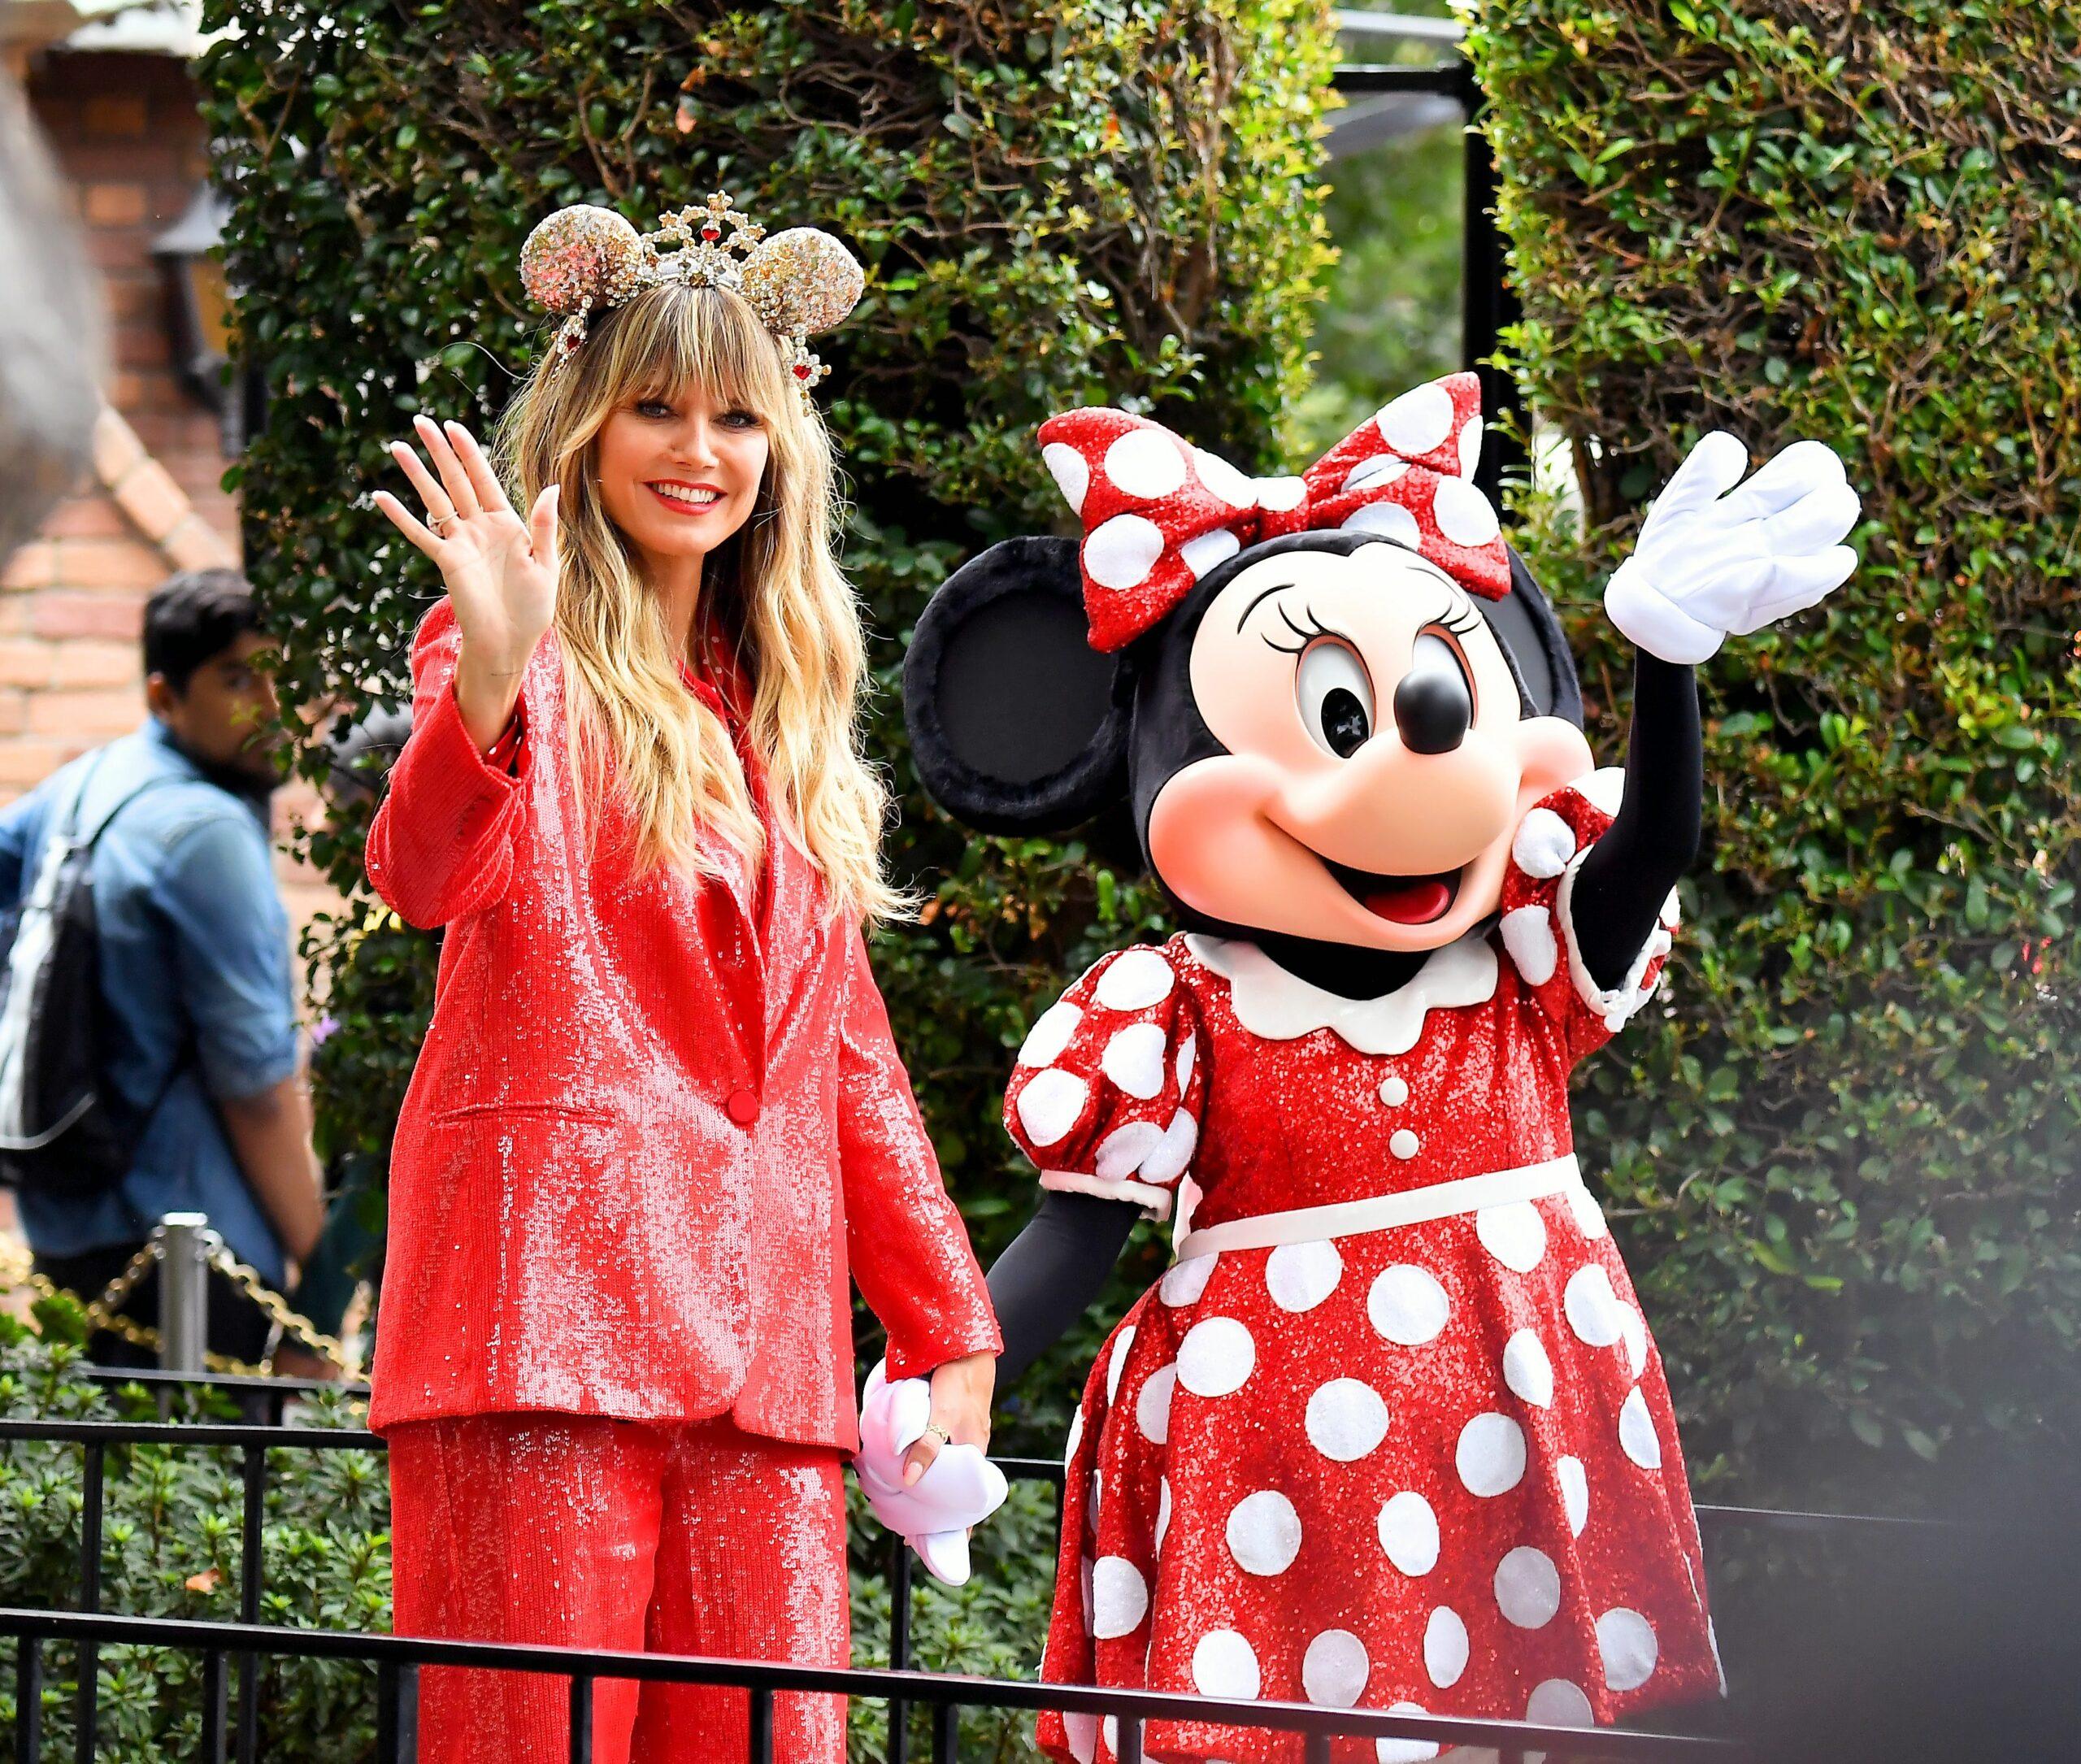 Heidi Klum poses for pictures with Minnie Mouse as she promotes a pair of mickey ears that she designed herself at Disneyland